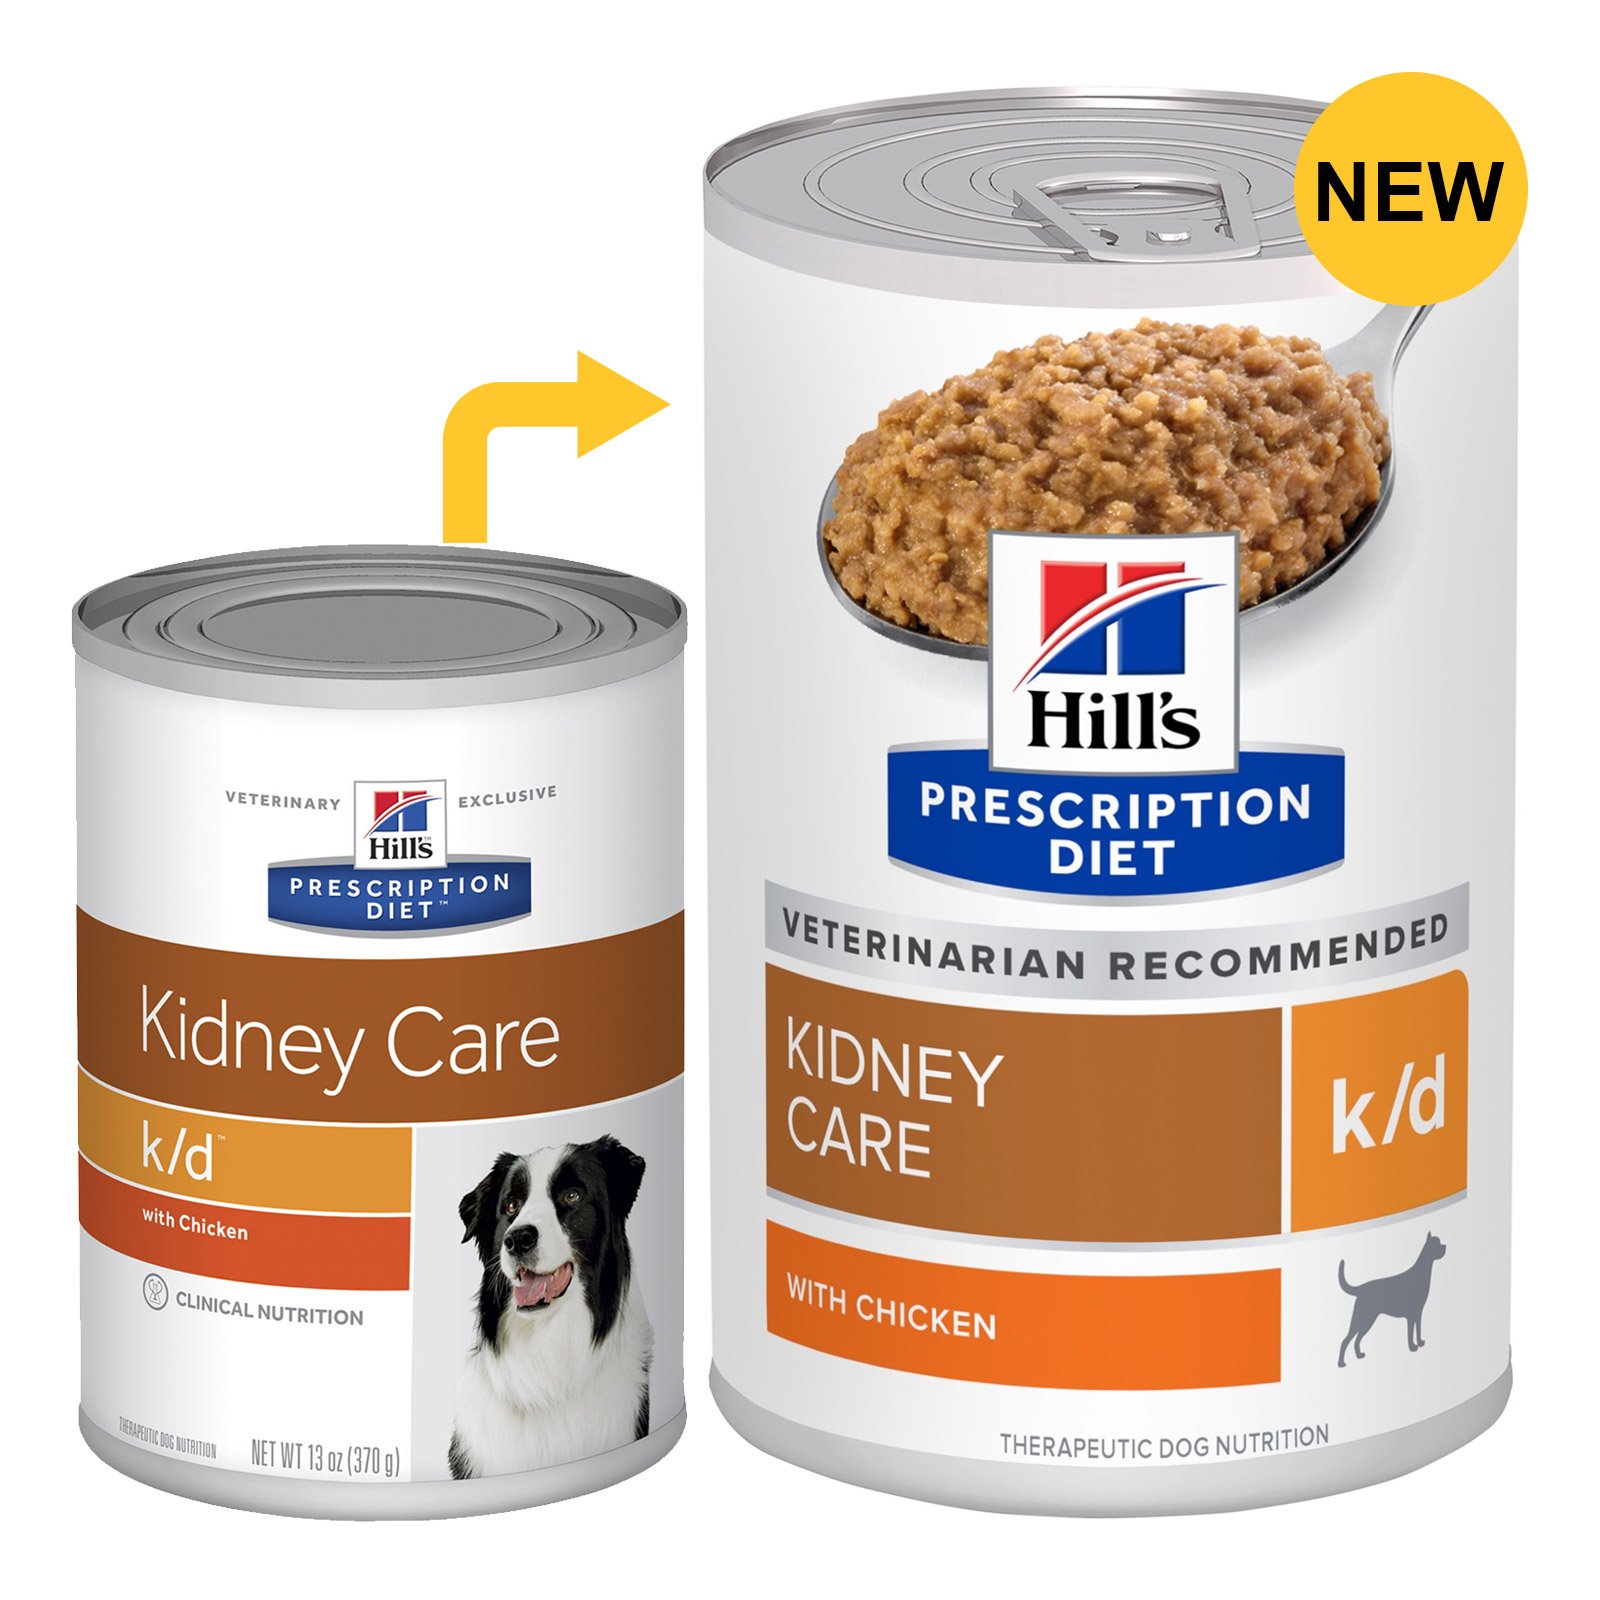 Hill's Prescription Diet k/d Kidney Care with Chicken Canned Dog Food